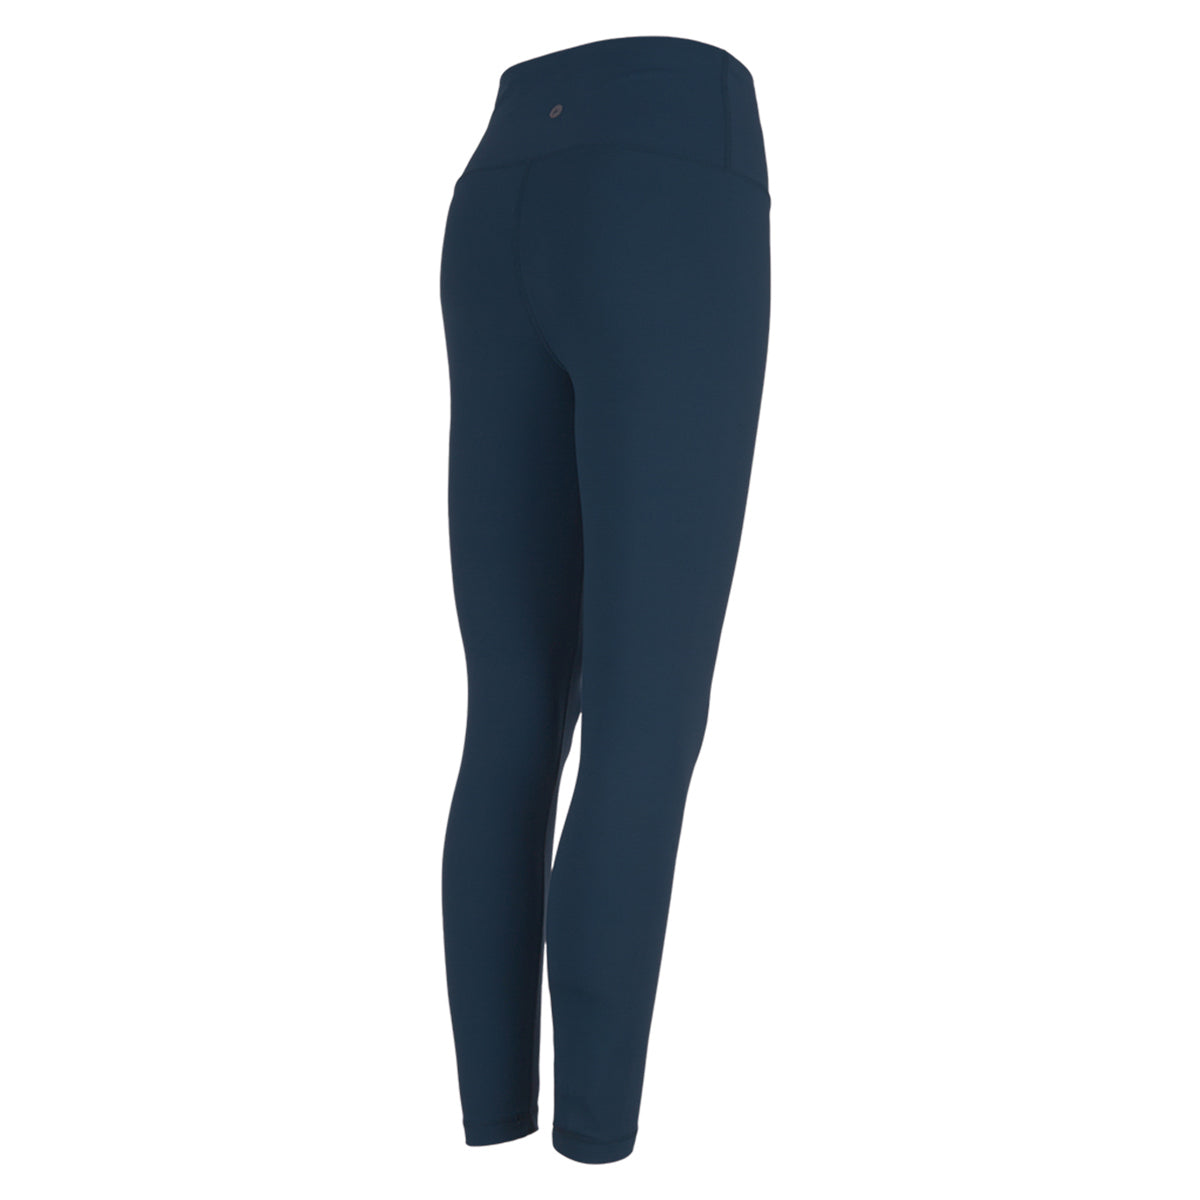 90 Degree by Reflex Solid Navy Blue Leggings Size XS - 68% off